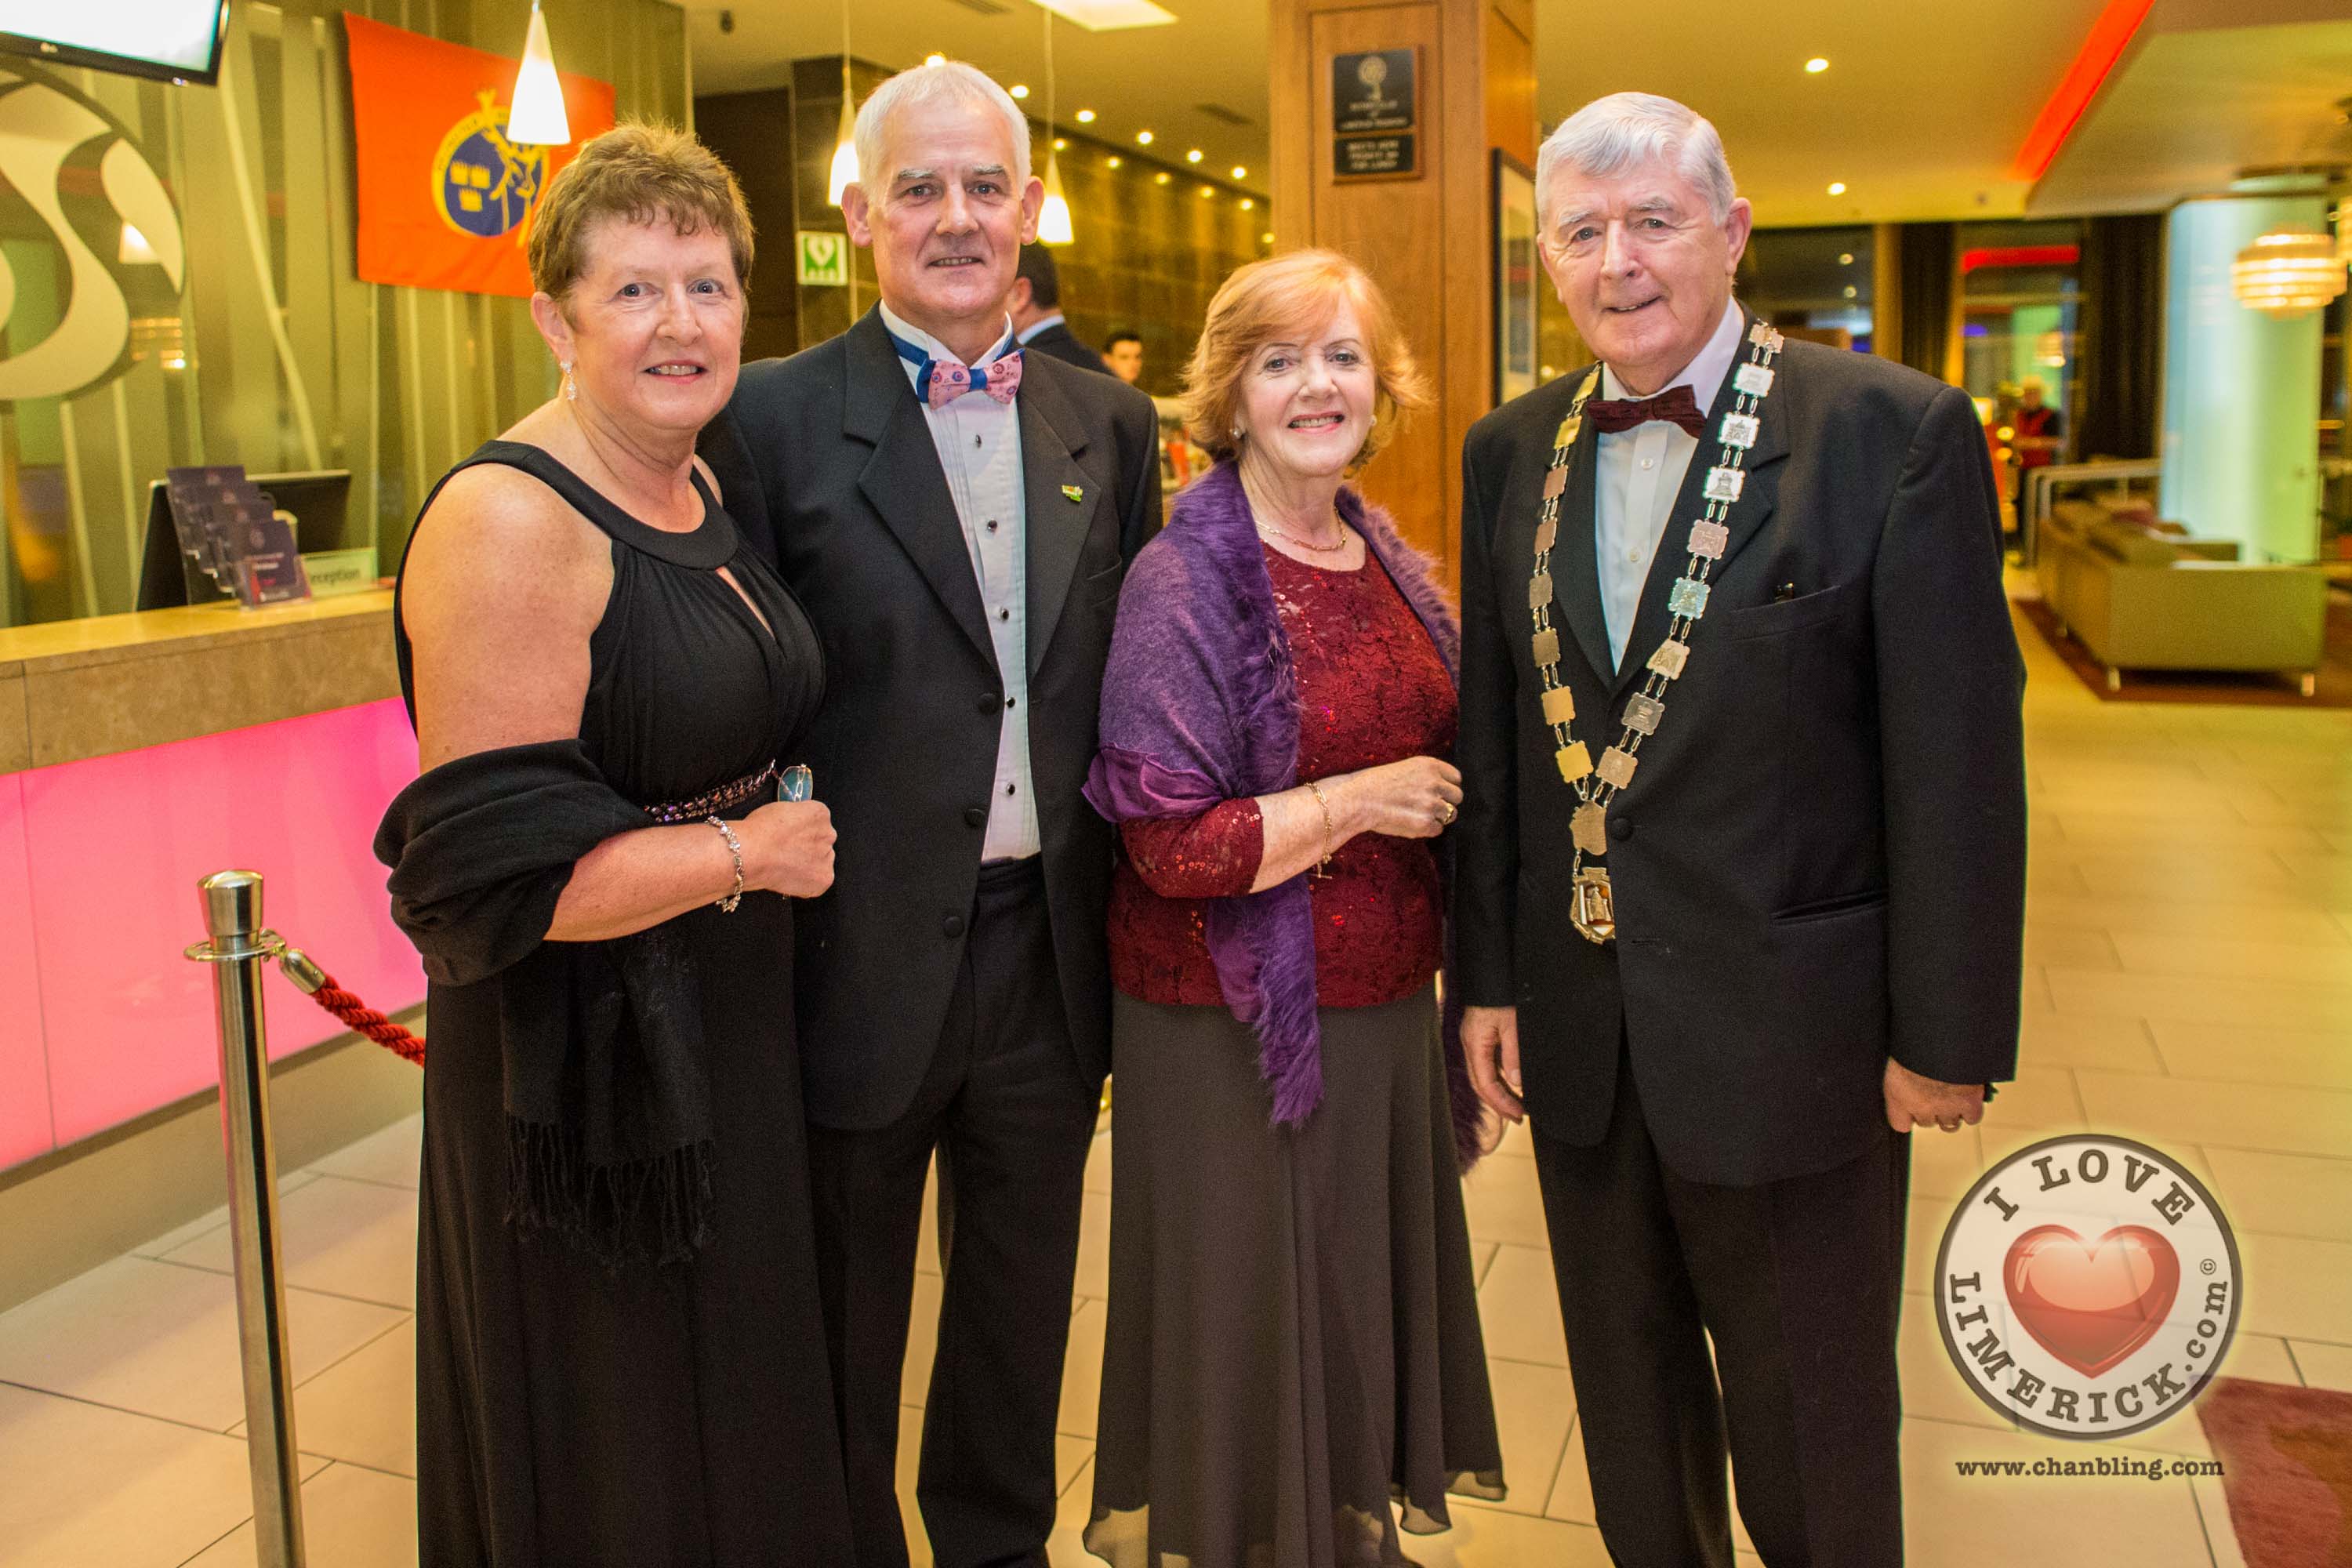 Colette and David Sheahan, Michael Hourigan, Mayor for Metropolitan District of Limerick and his wife Pat Hourigan. Picture Cian Reinhardt/ilovelimerick